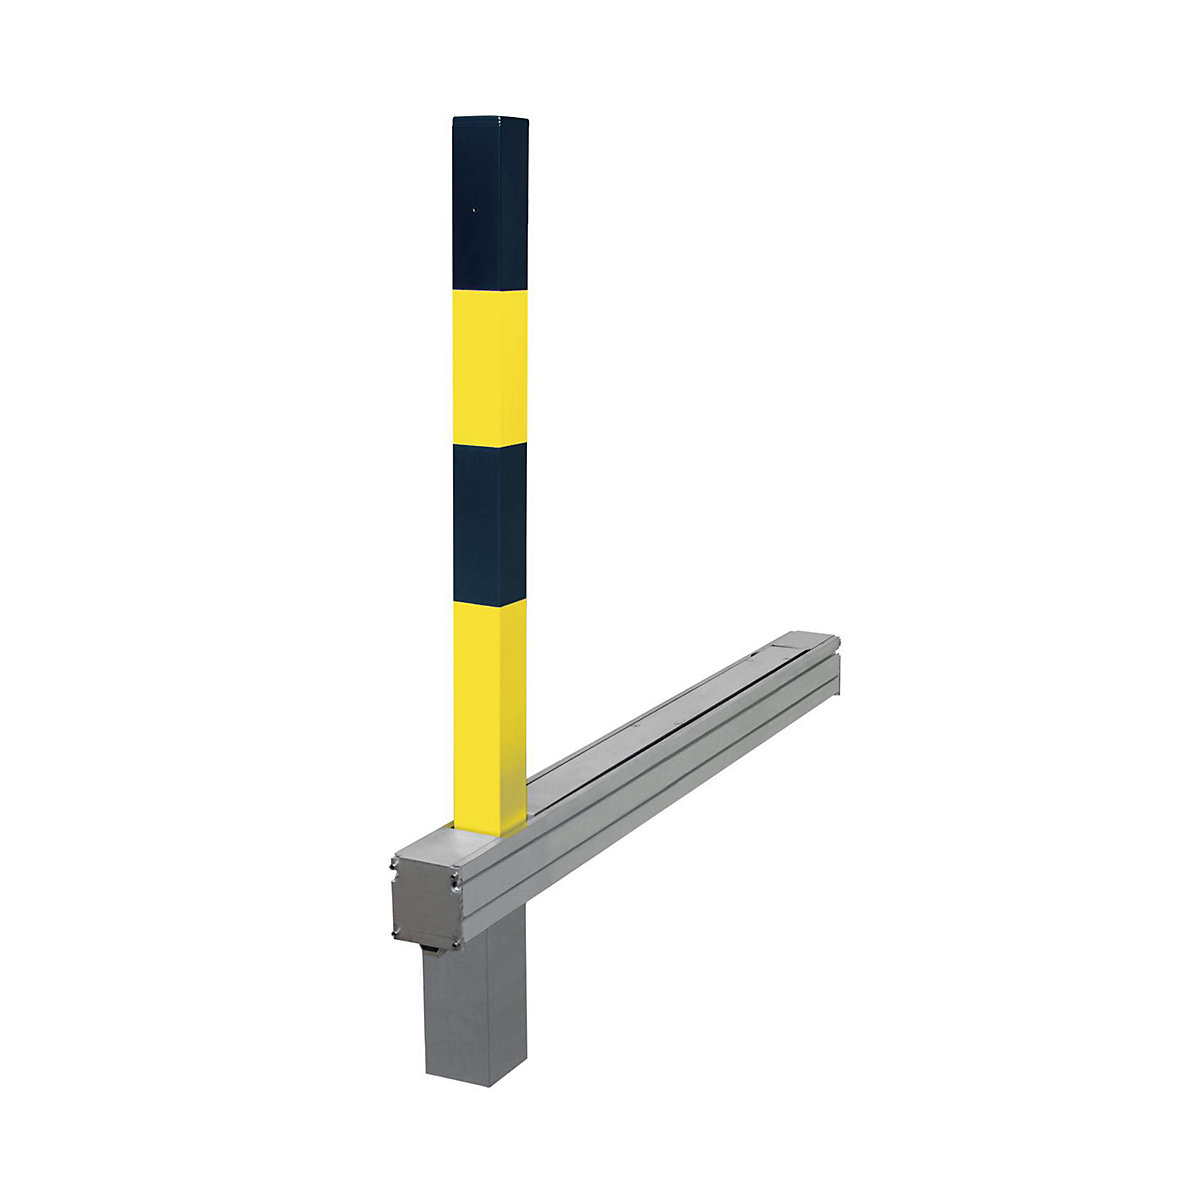 Folding barrier post, model A, with round cylinder lock, black-yellow-8